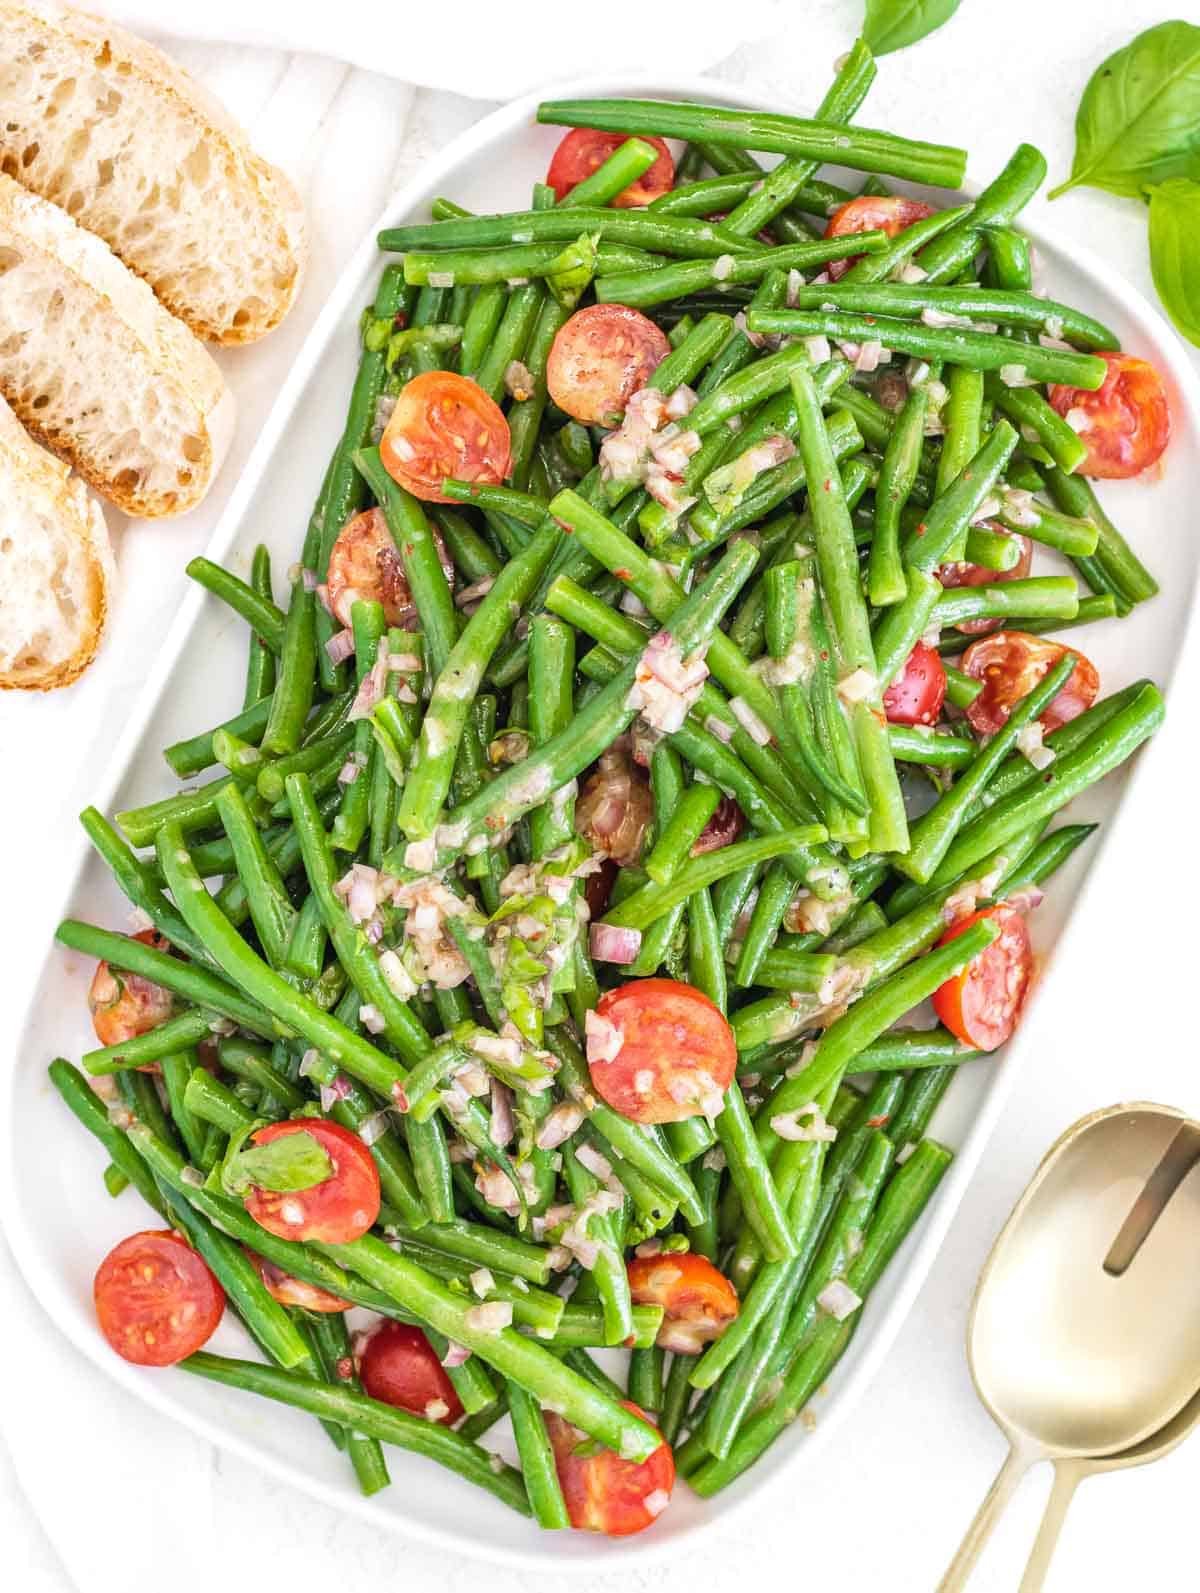 Green bean salad with creamy dressing